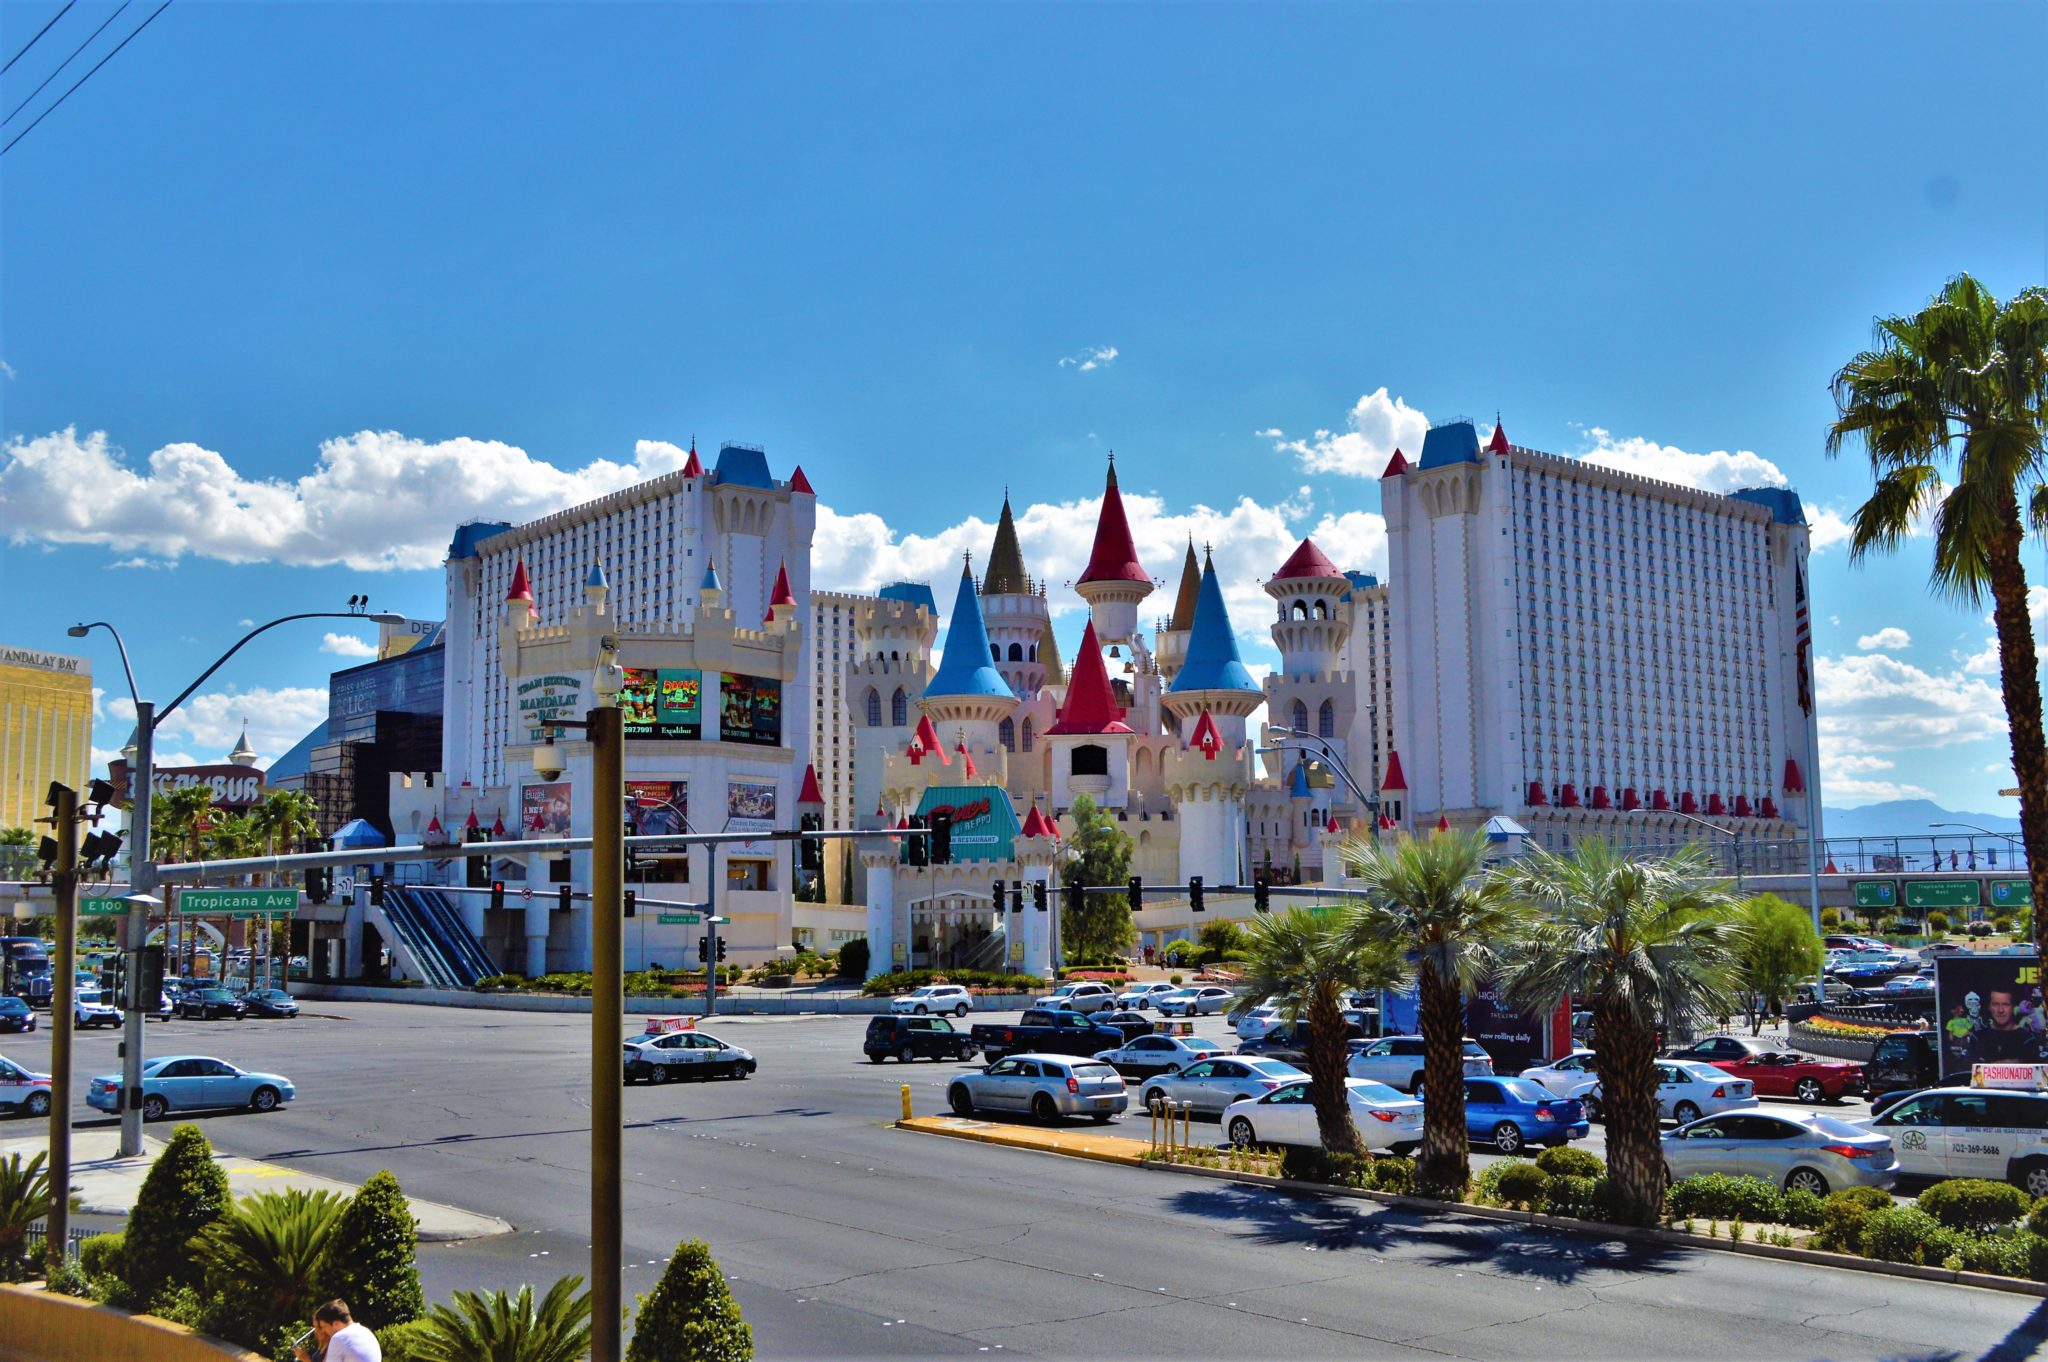 Excalibur Hotel On The Strip In Las Vegas Nevada Round The World